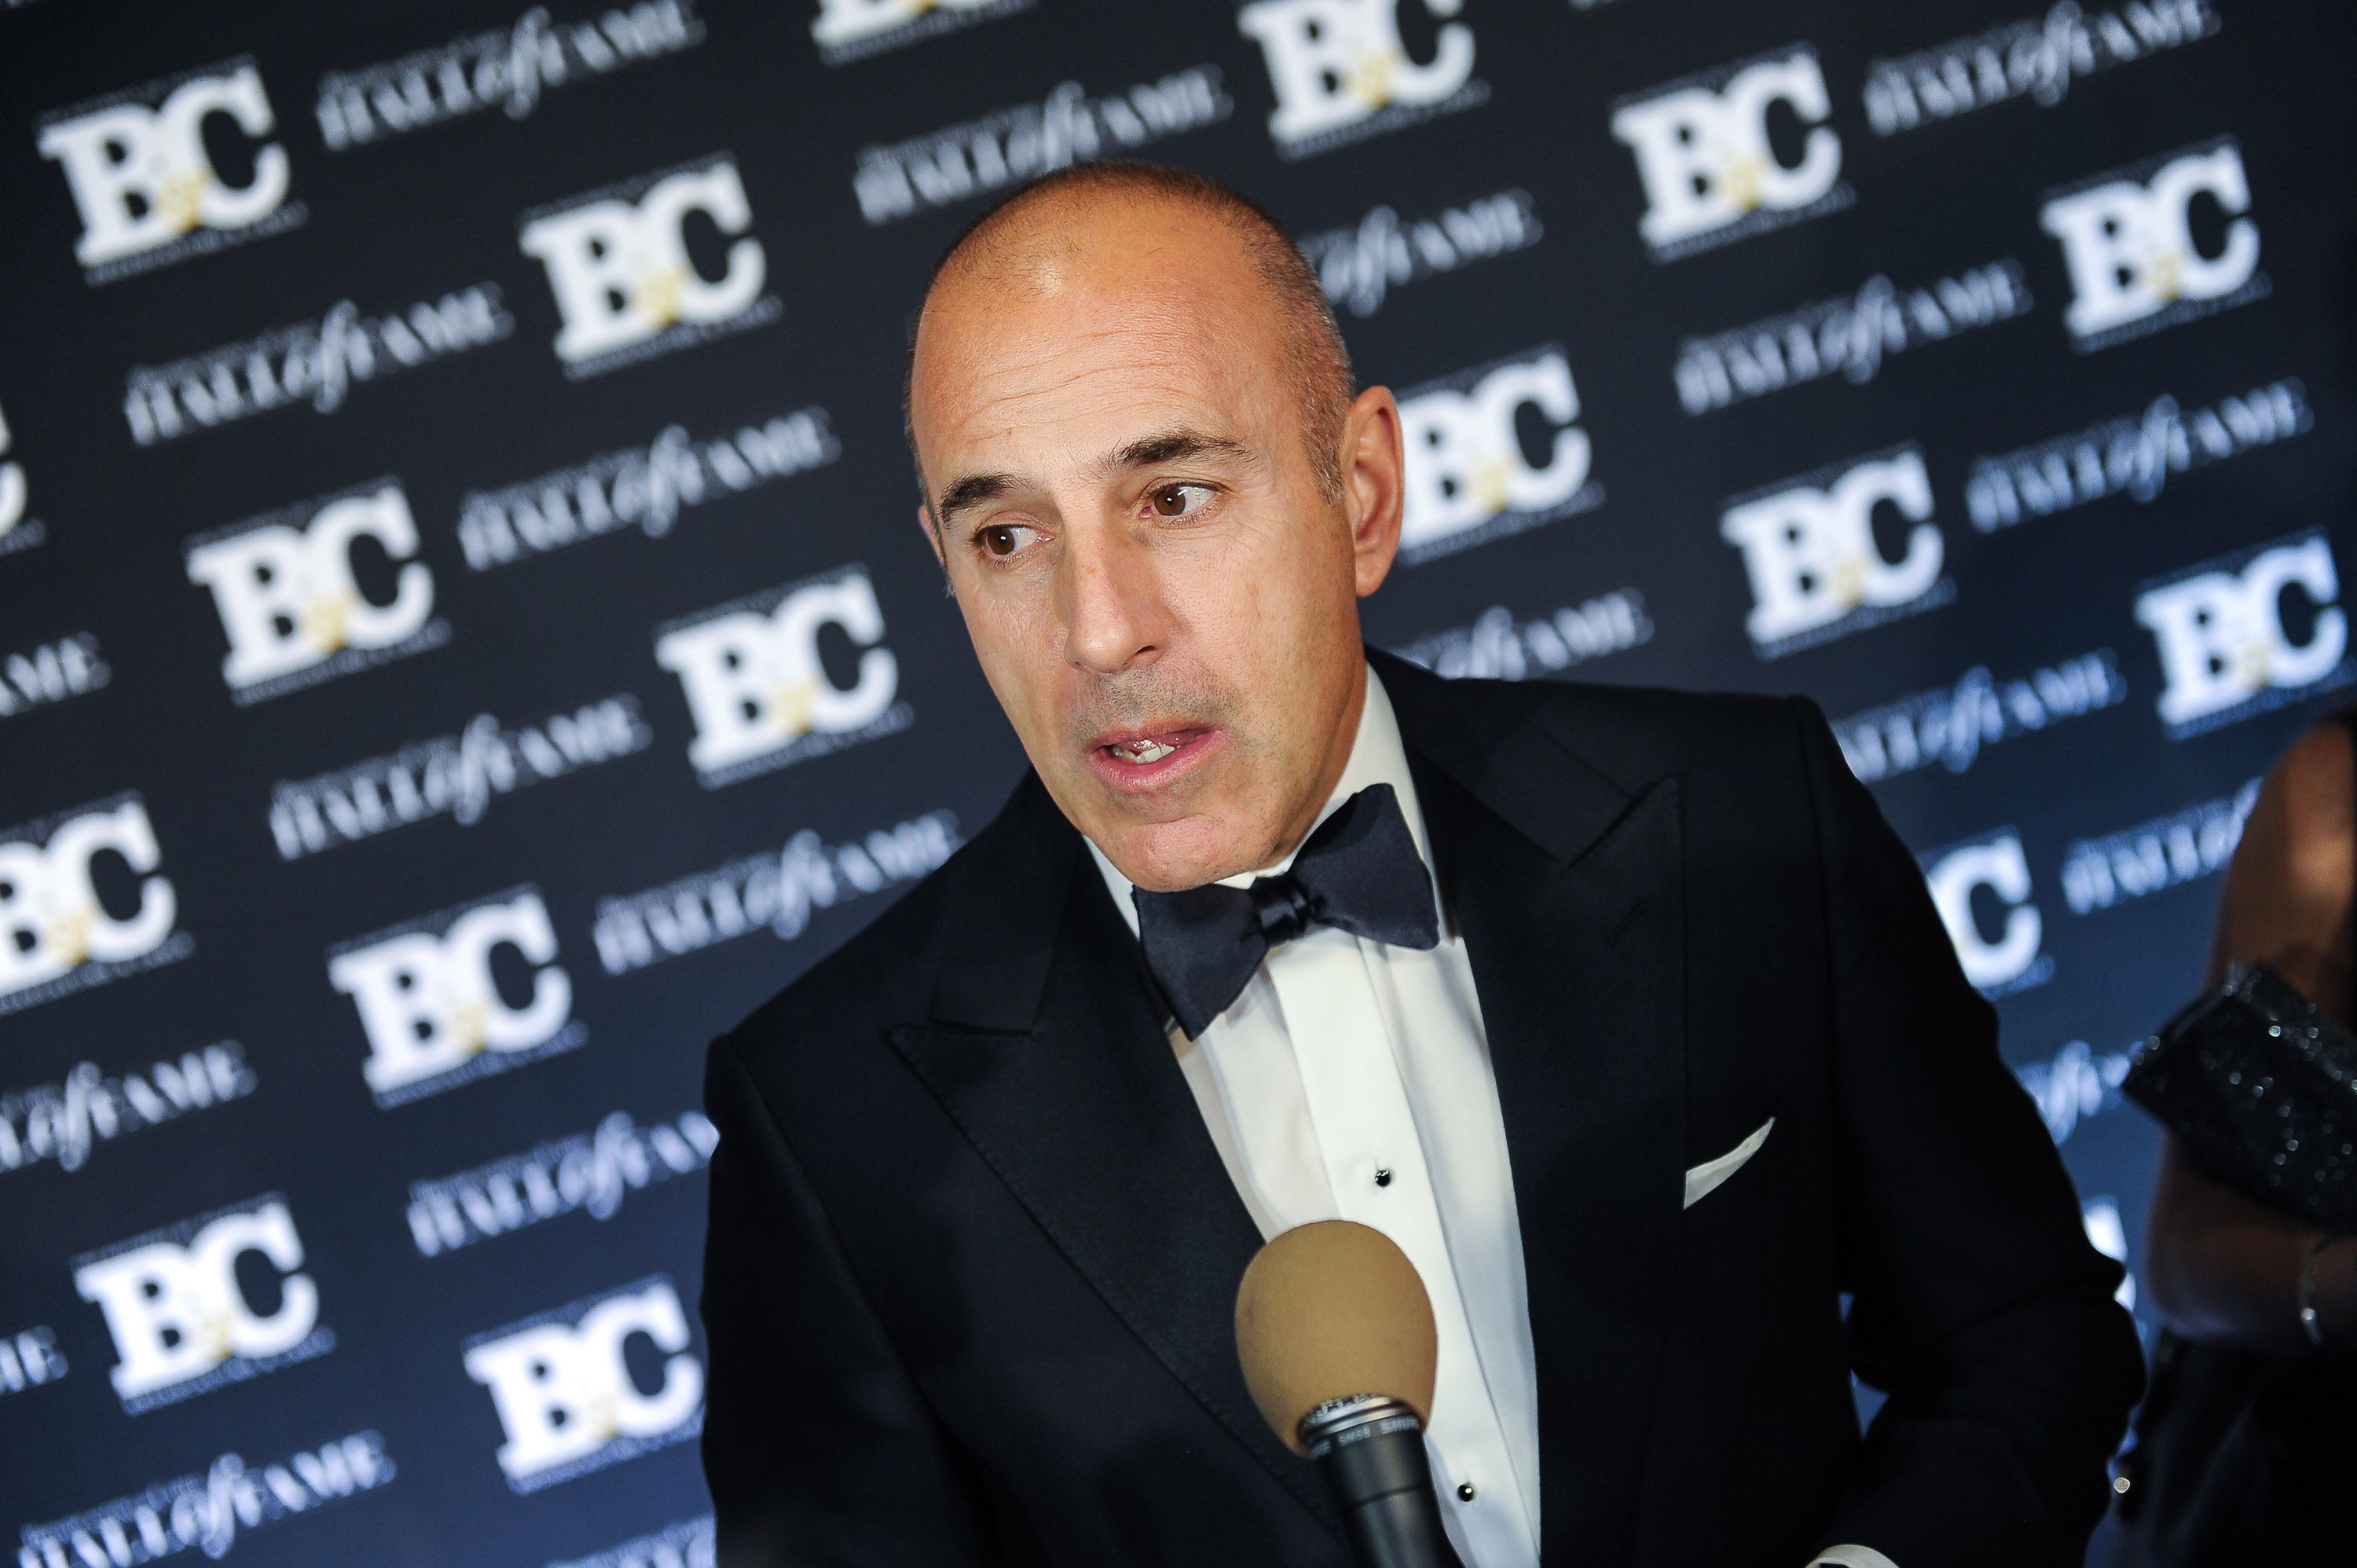 Matt Lauer at Broadcasting and Cable Hall Of Fame Awards 25th Anniversary Gala on October 20, 2015, in New York City. | Photo: Getty Images